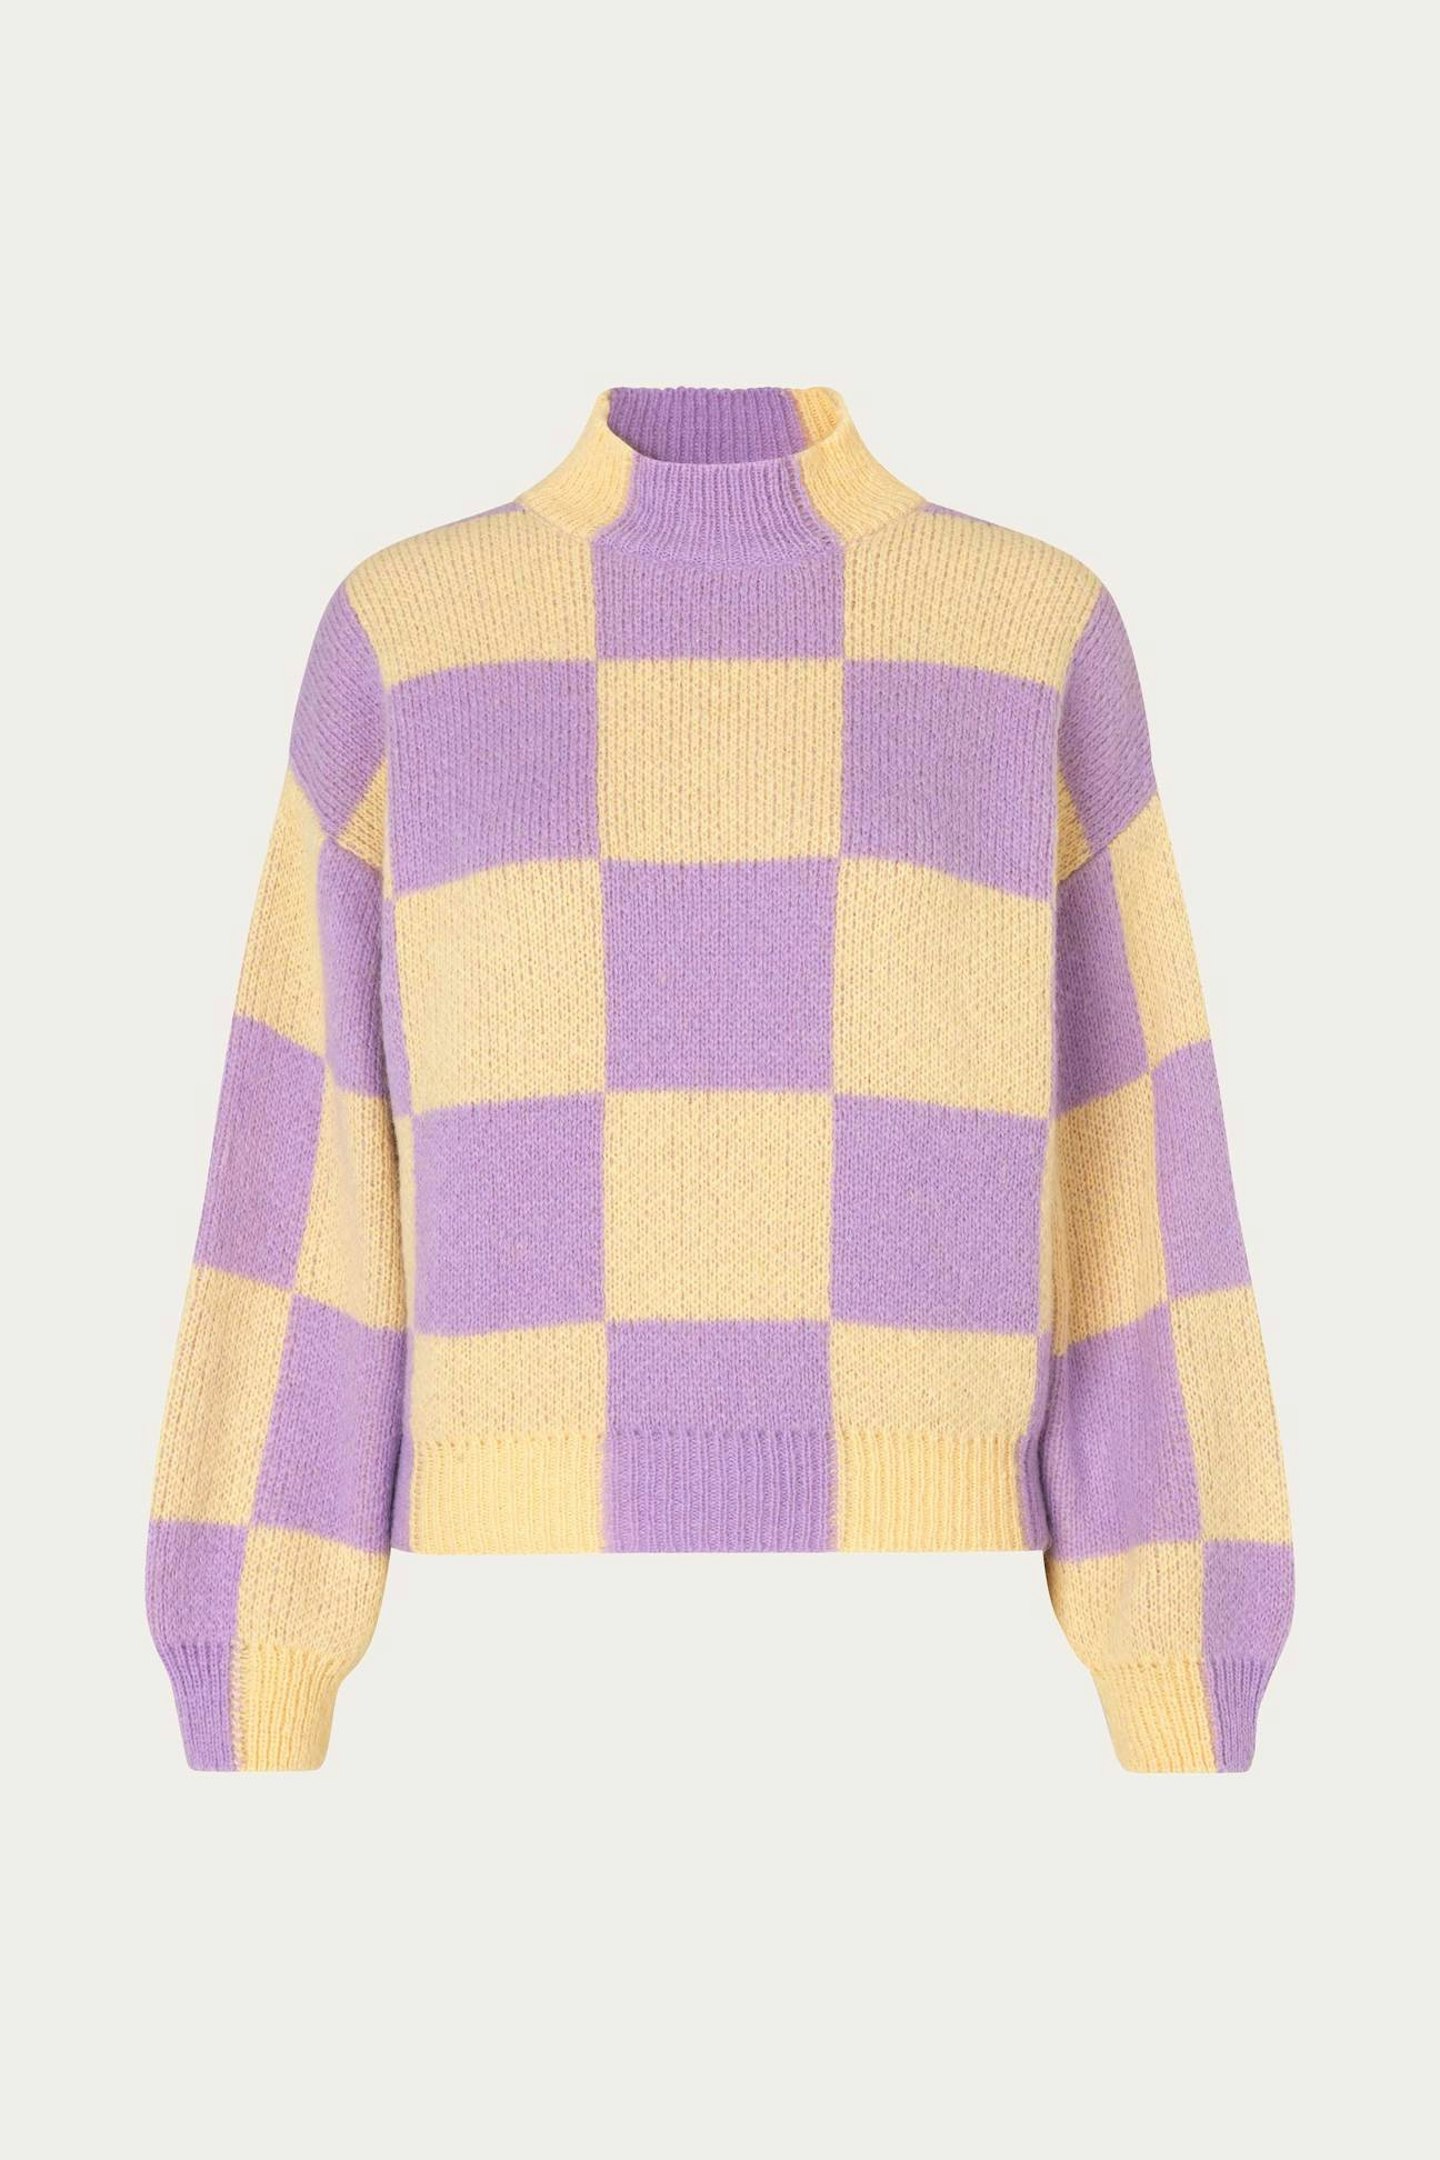 Adondis Sweater Sand And Lavender, £210